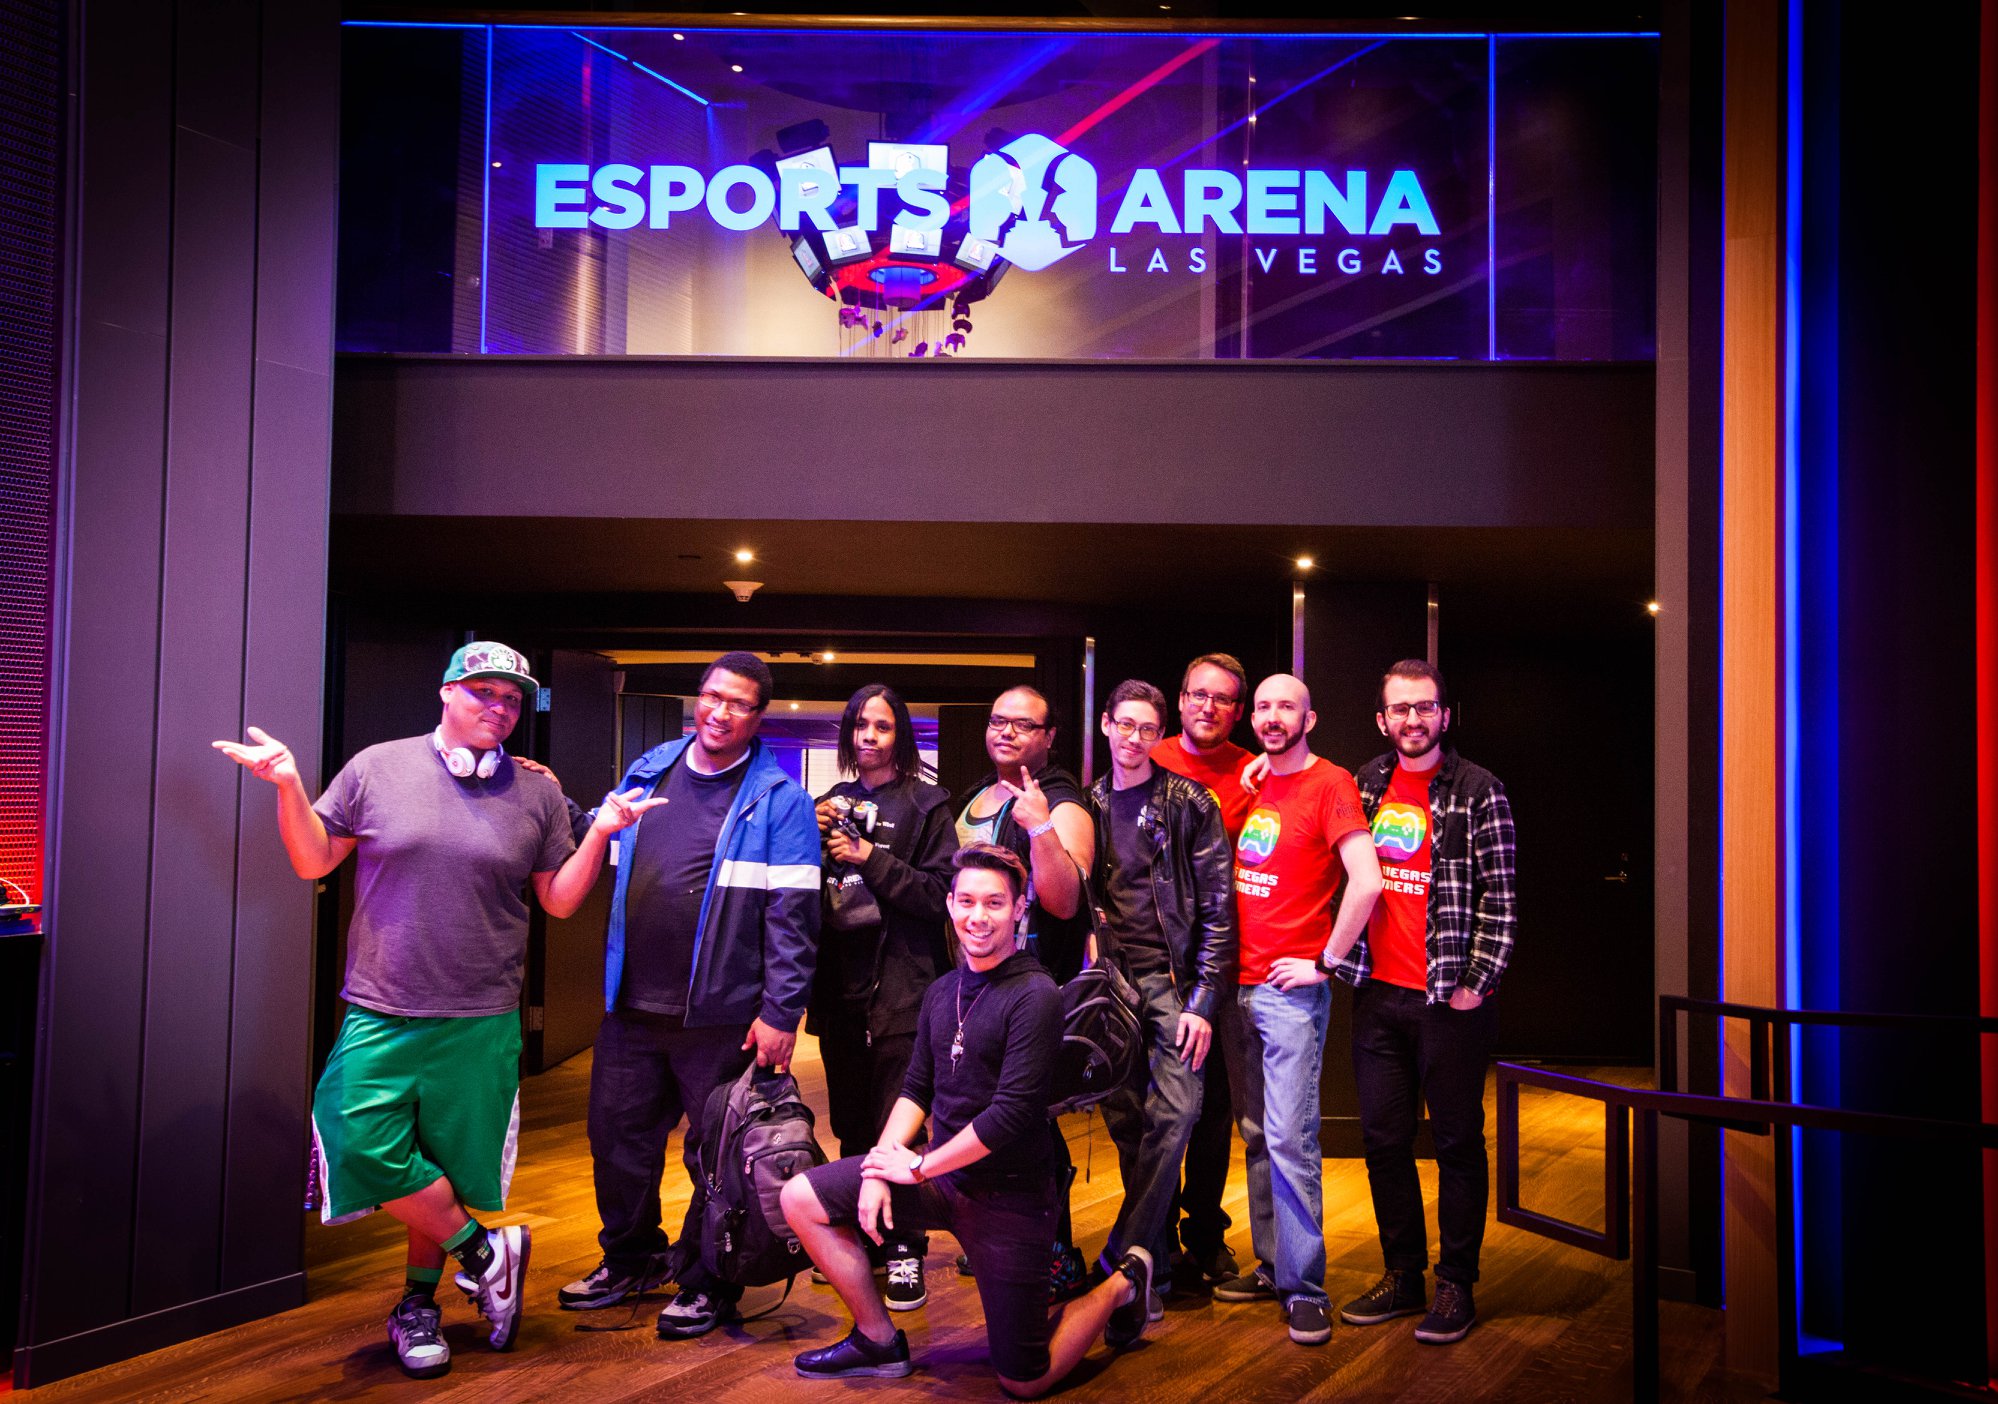 The Las Vegas Gaymers at the Esports Arena Gamer X